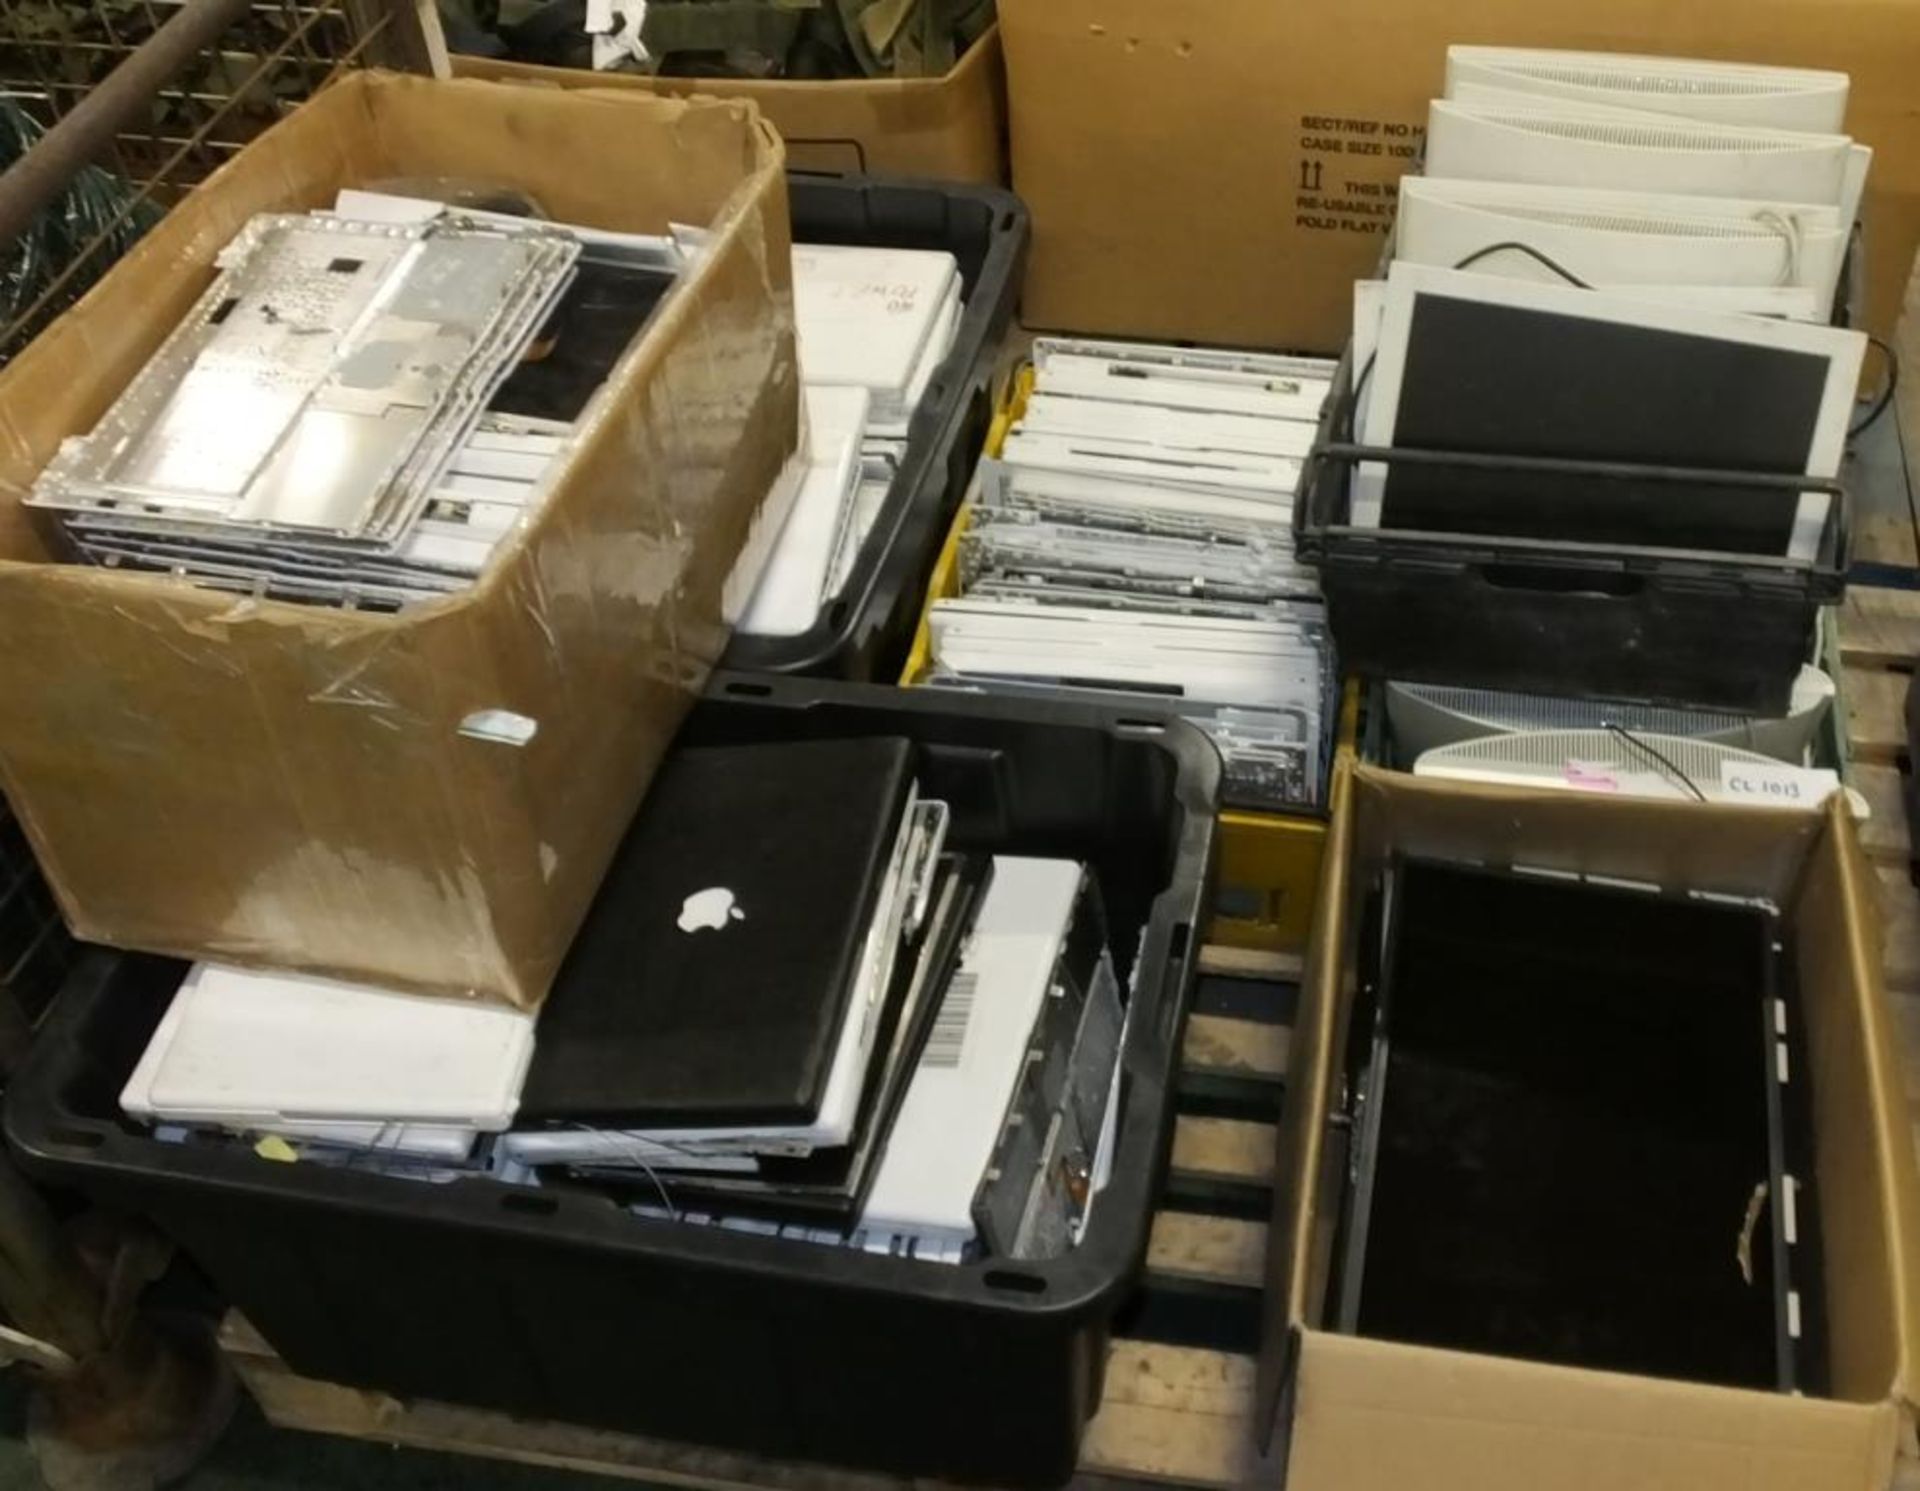 AS SPARES - LCD Screens, Apple Laptop Boards, Flat screen monitors